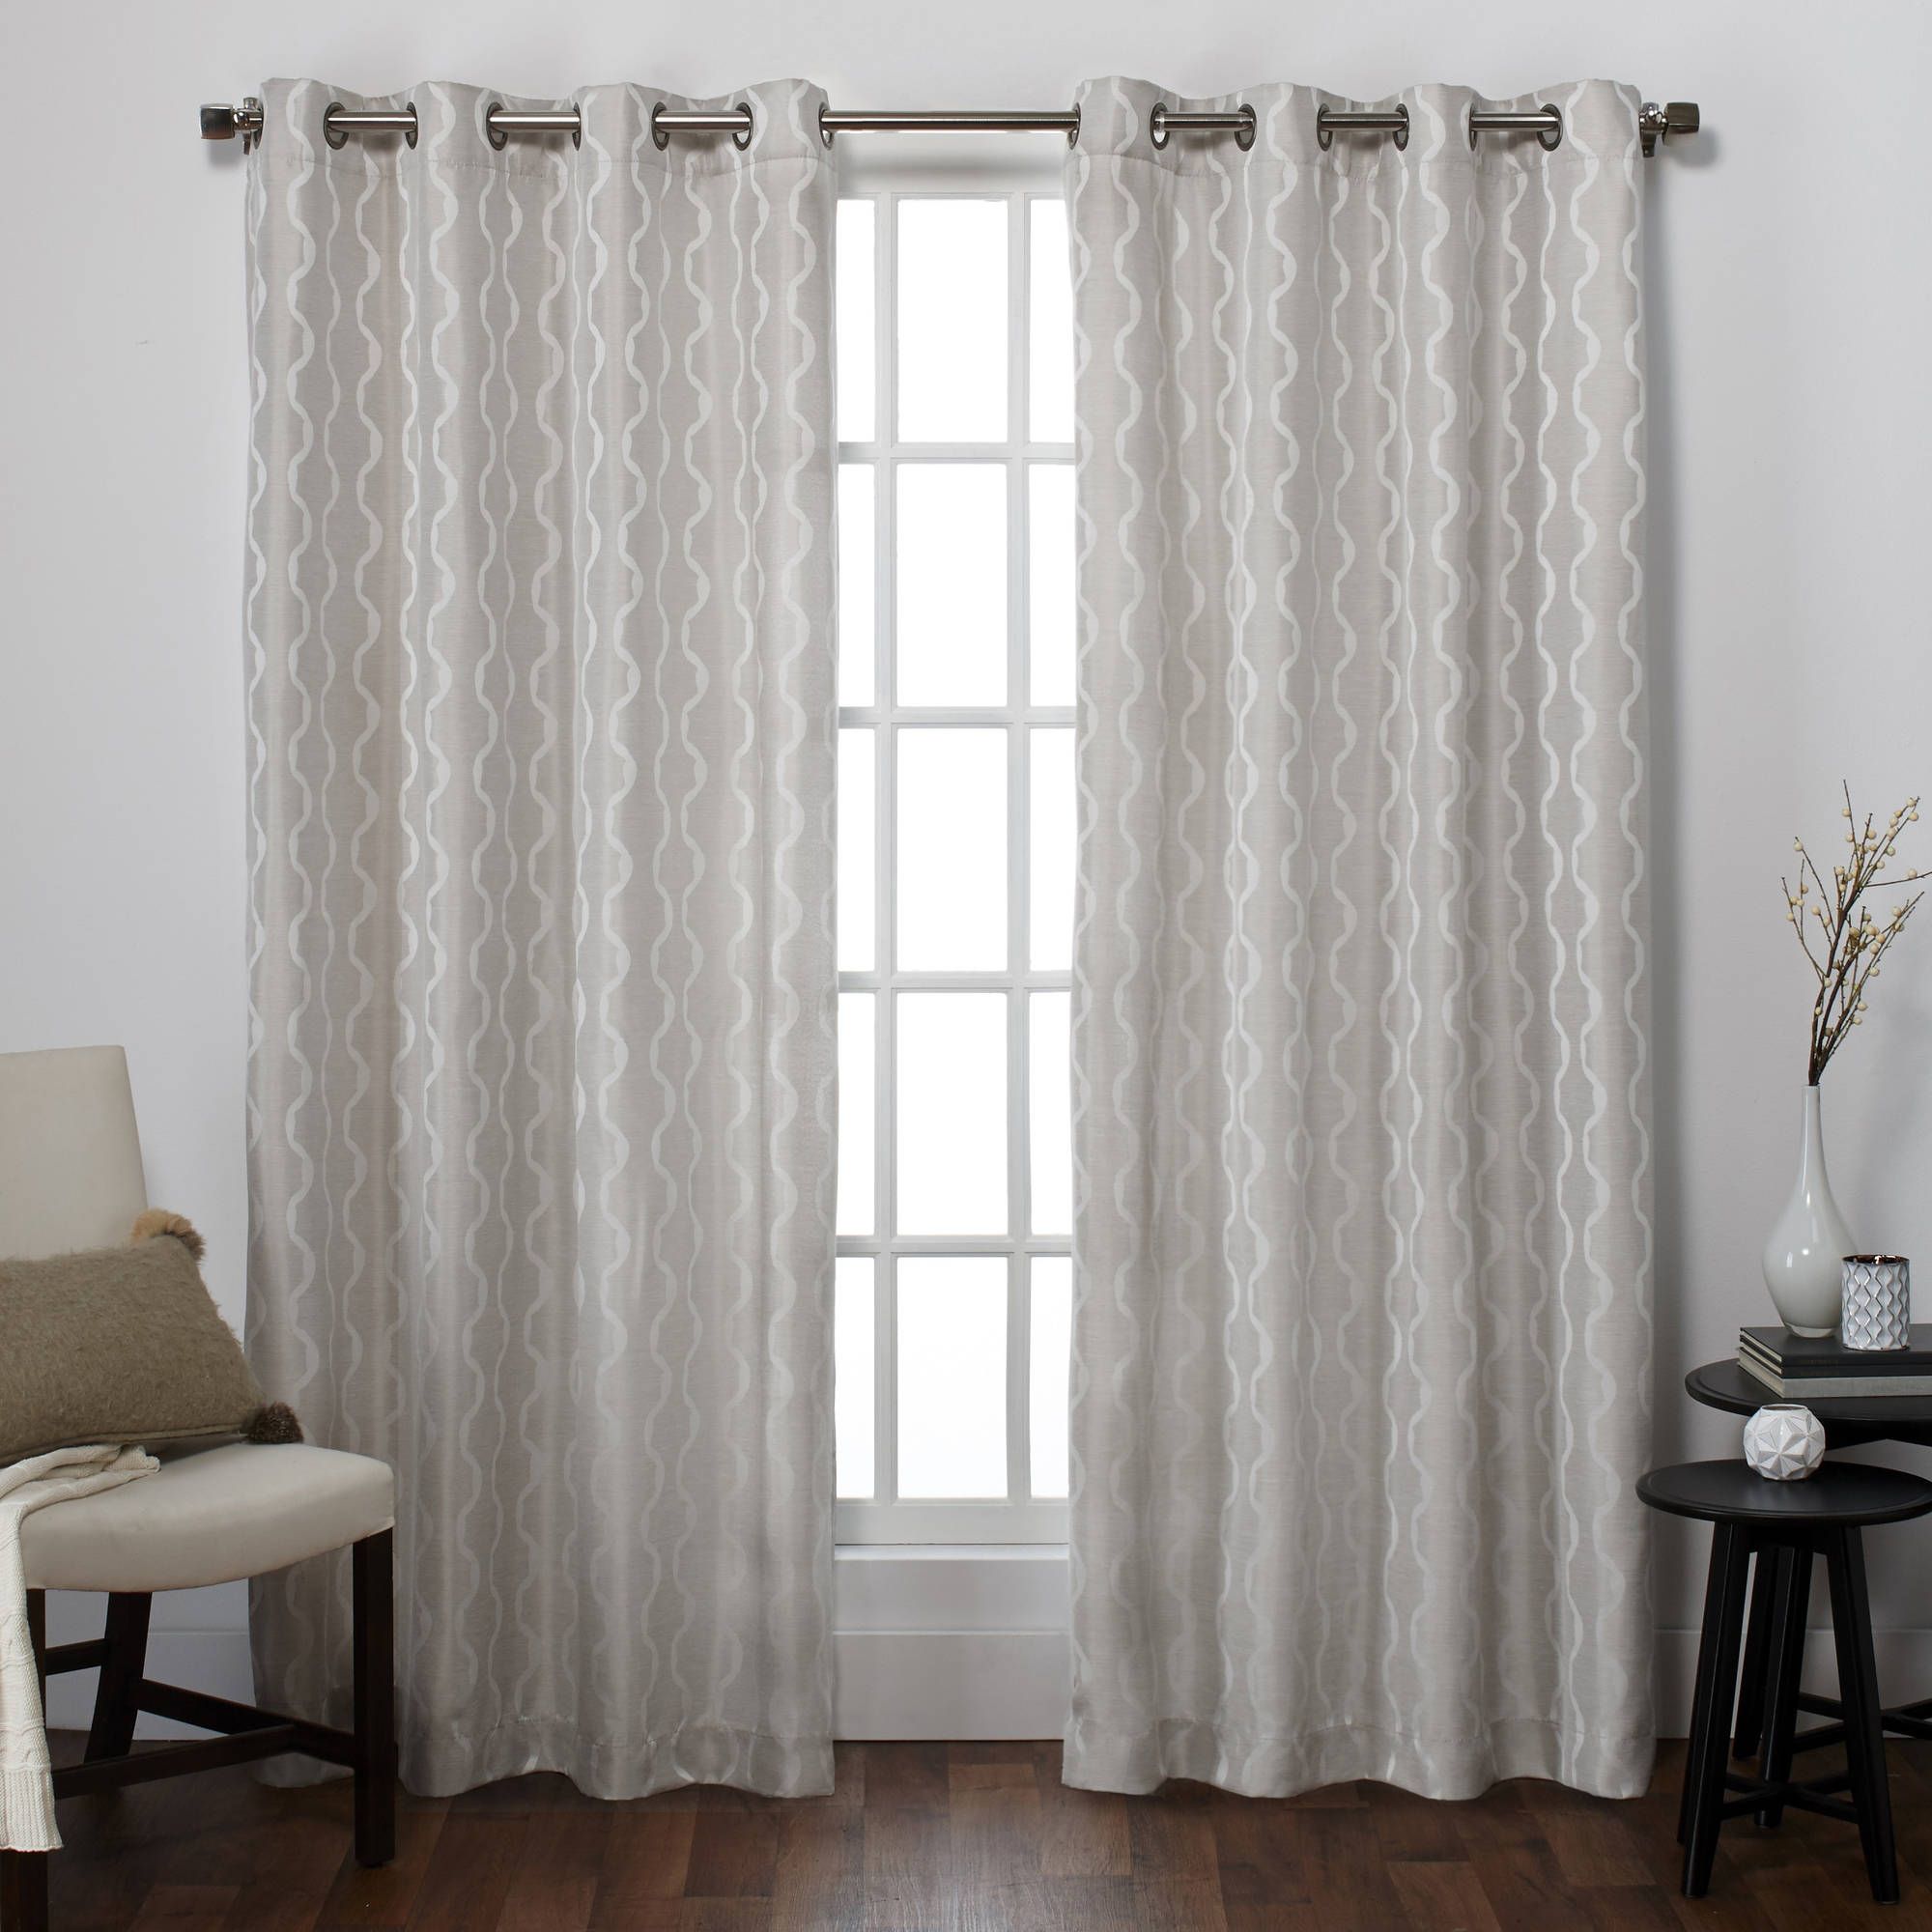 Baroque Textured Linen Look Jacquard Grommet Top Window Curtain Panels, Set  Of 2, Pewter, 54" X 108" Intended For Twig Insulated Blackout Curtain Panel Pairs With Grommet Top (View 28 of 30)